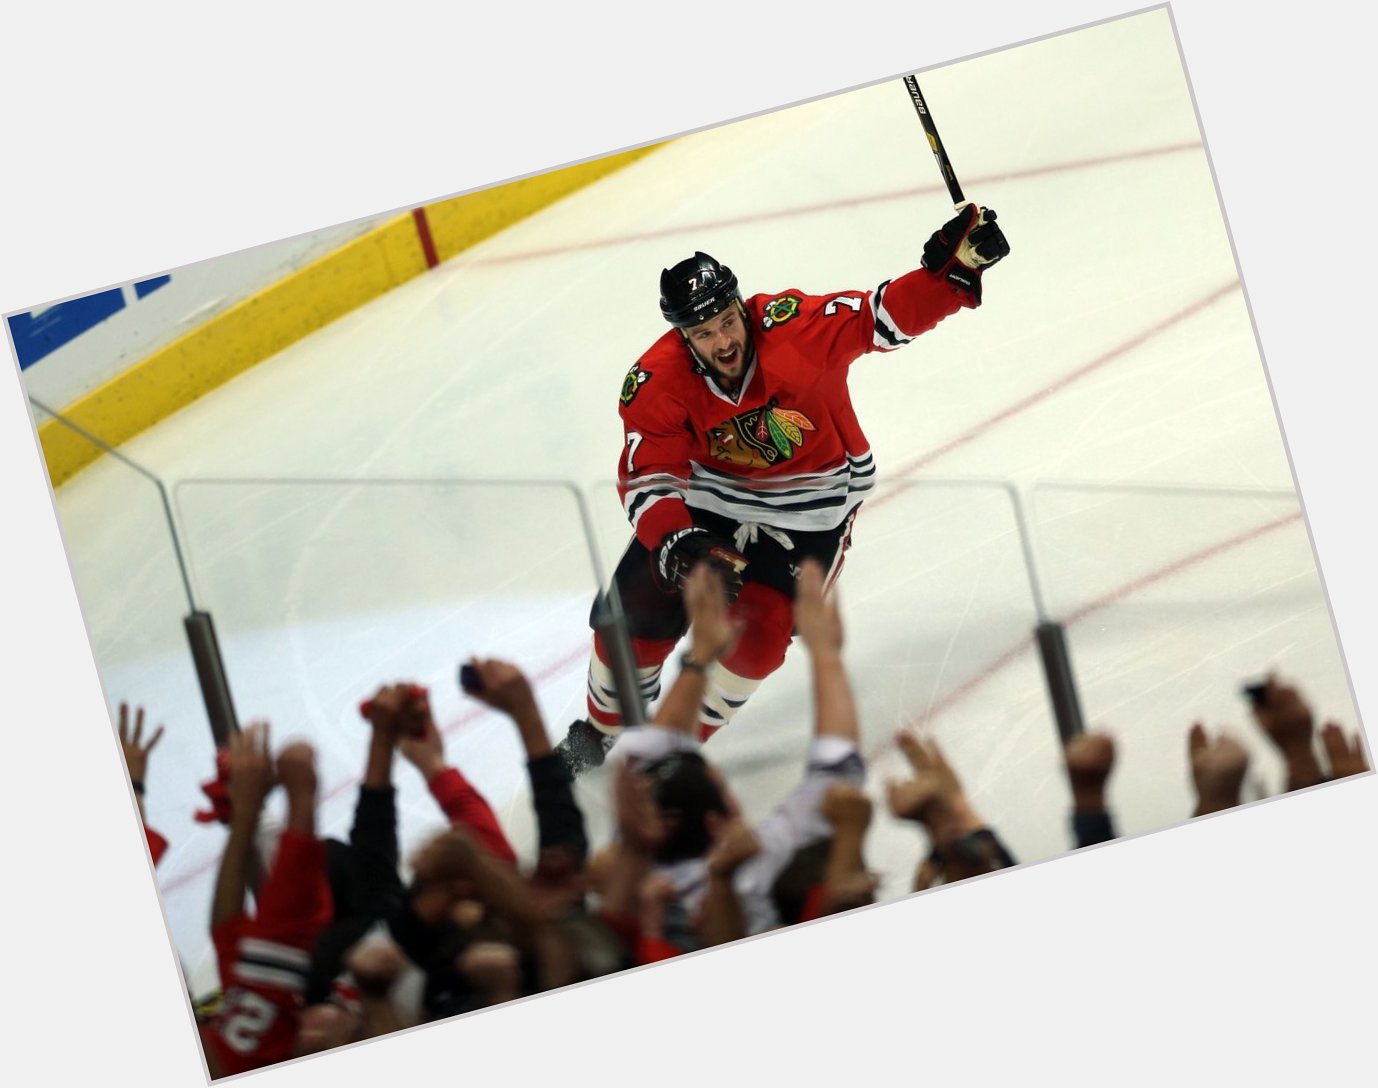 Happy 32nd birthday, Brent Seabrook! 

Celebrate tonight with a W. 